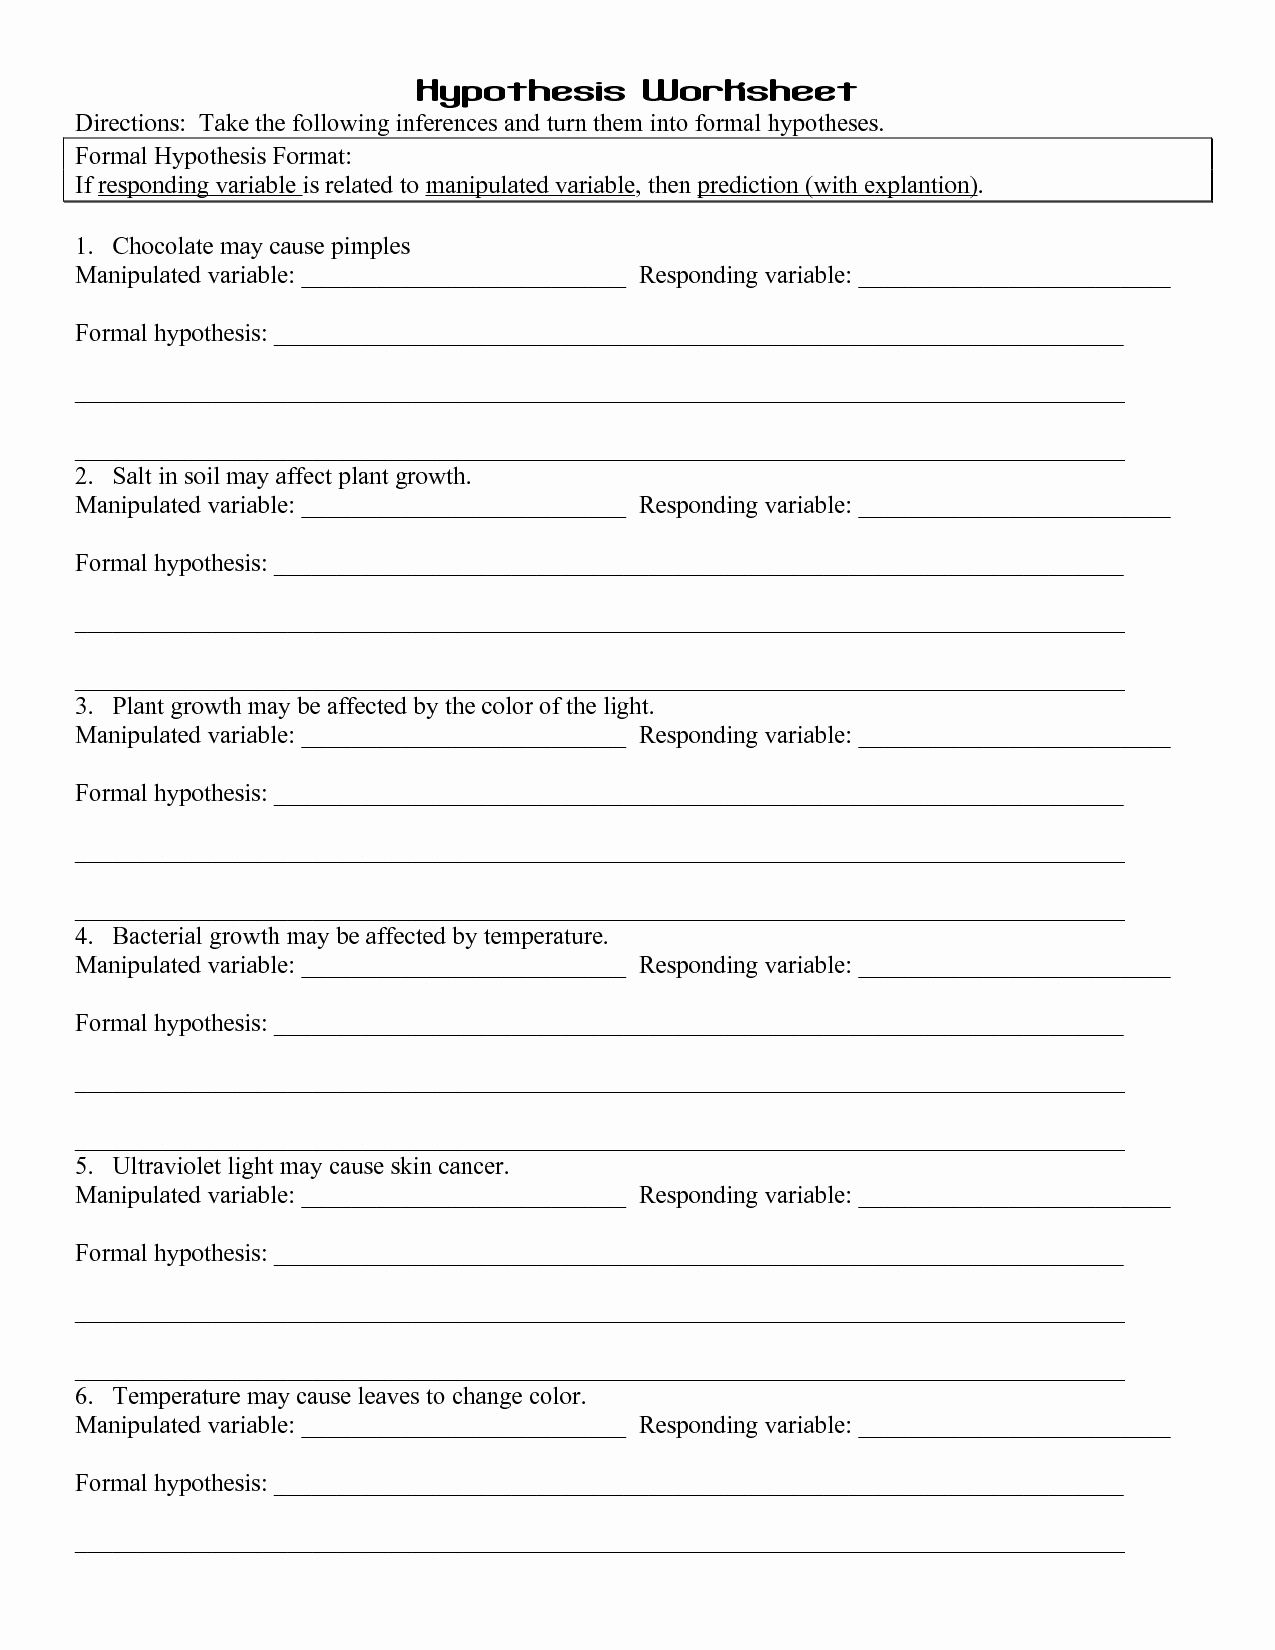 Writing A Hypothesis Worksheet Beautiful if then Hypothesis Worksheet Scence